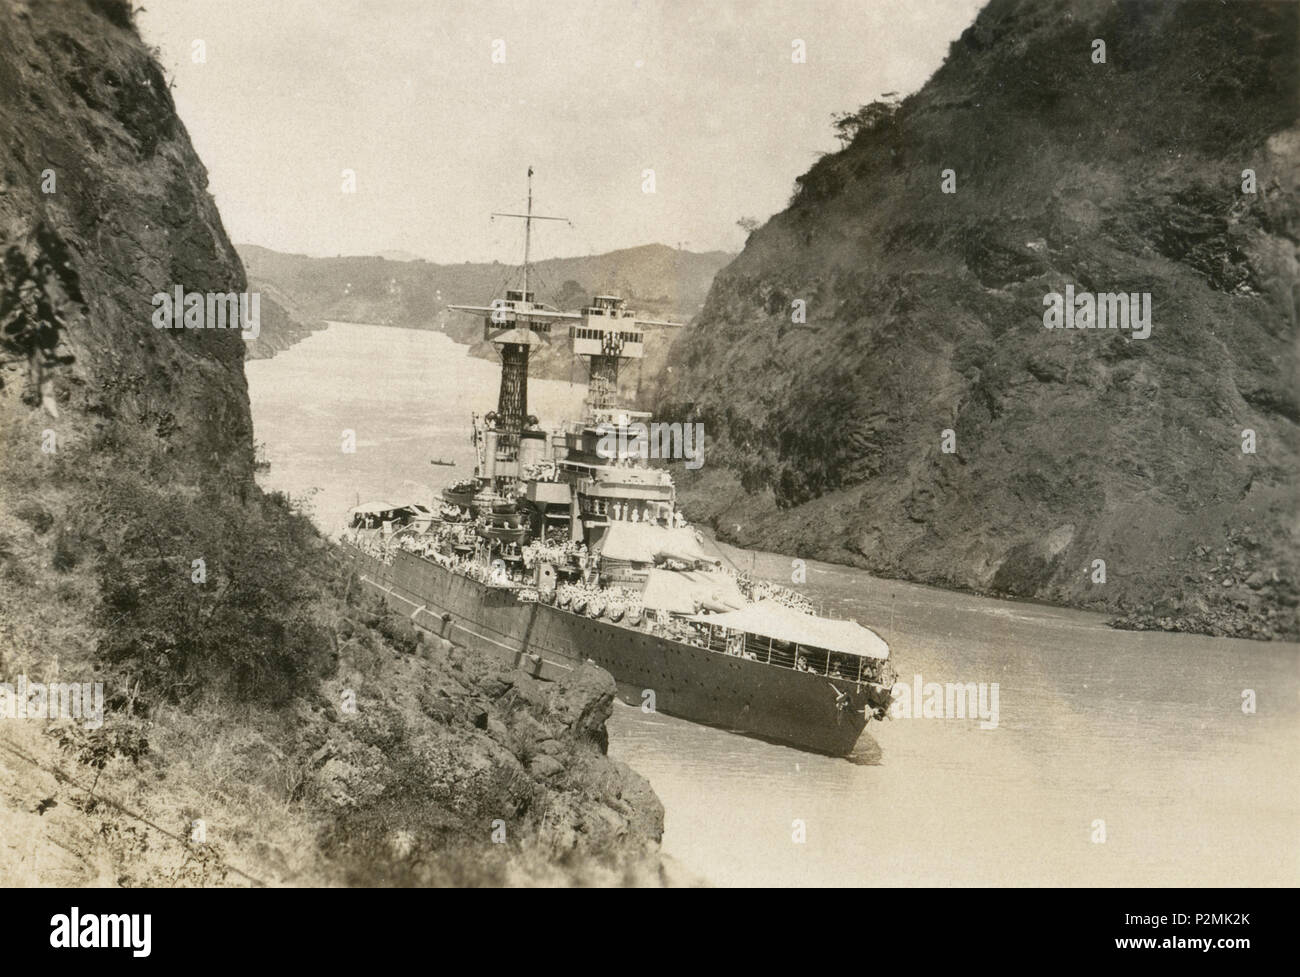 Antique February 13, 1923 photograph, USS Maryland (BB-46) in the Culebra Cut (formerly Gaillard Cut) in the Panama Canal. USS Maryland (BB-46), also known as 'Old Mary' or 'Fighting Mary' to her crewmates, was a Colorado-class battleship. SOURCE: ORIGINAL PHOTOGRAPH Stock Photo